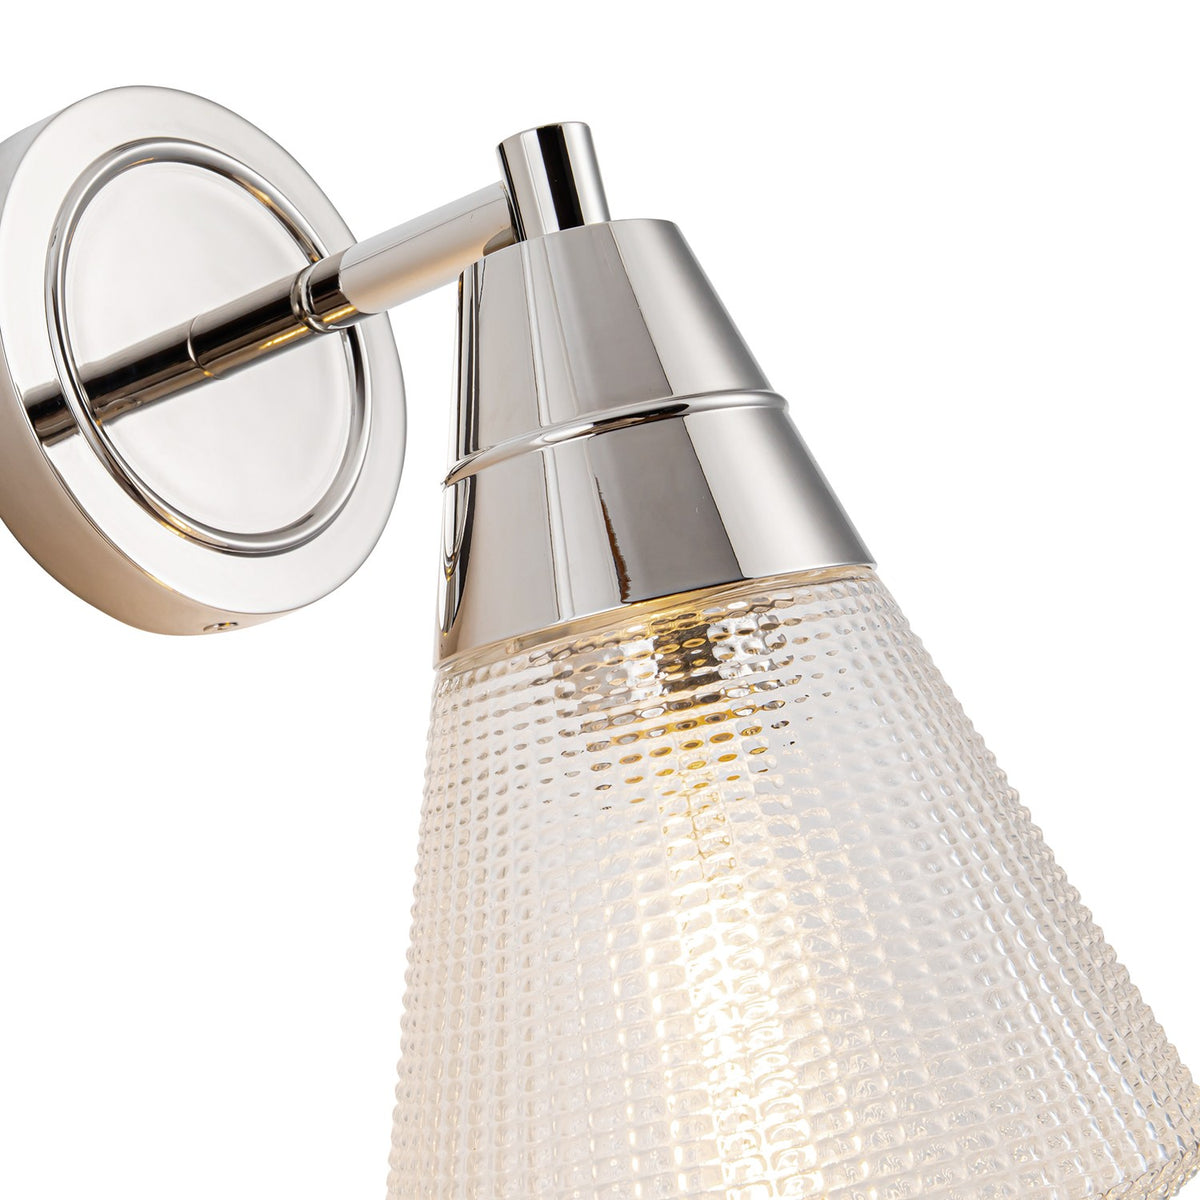 Alora One Light Wall Sconce from the Willard collection in Polished Nickel/Clear Prismatic Glass finish